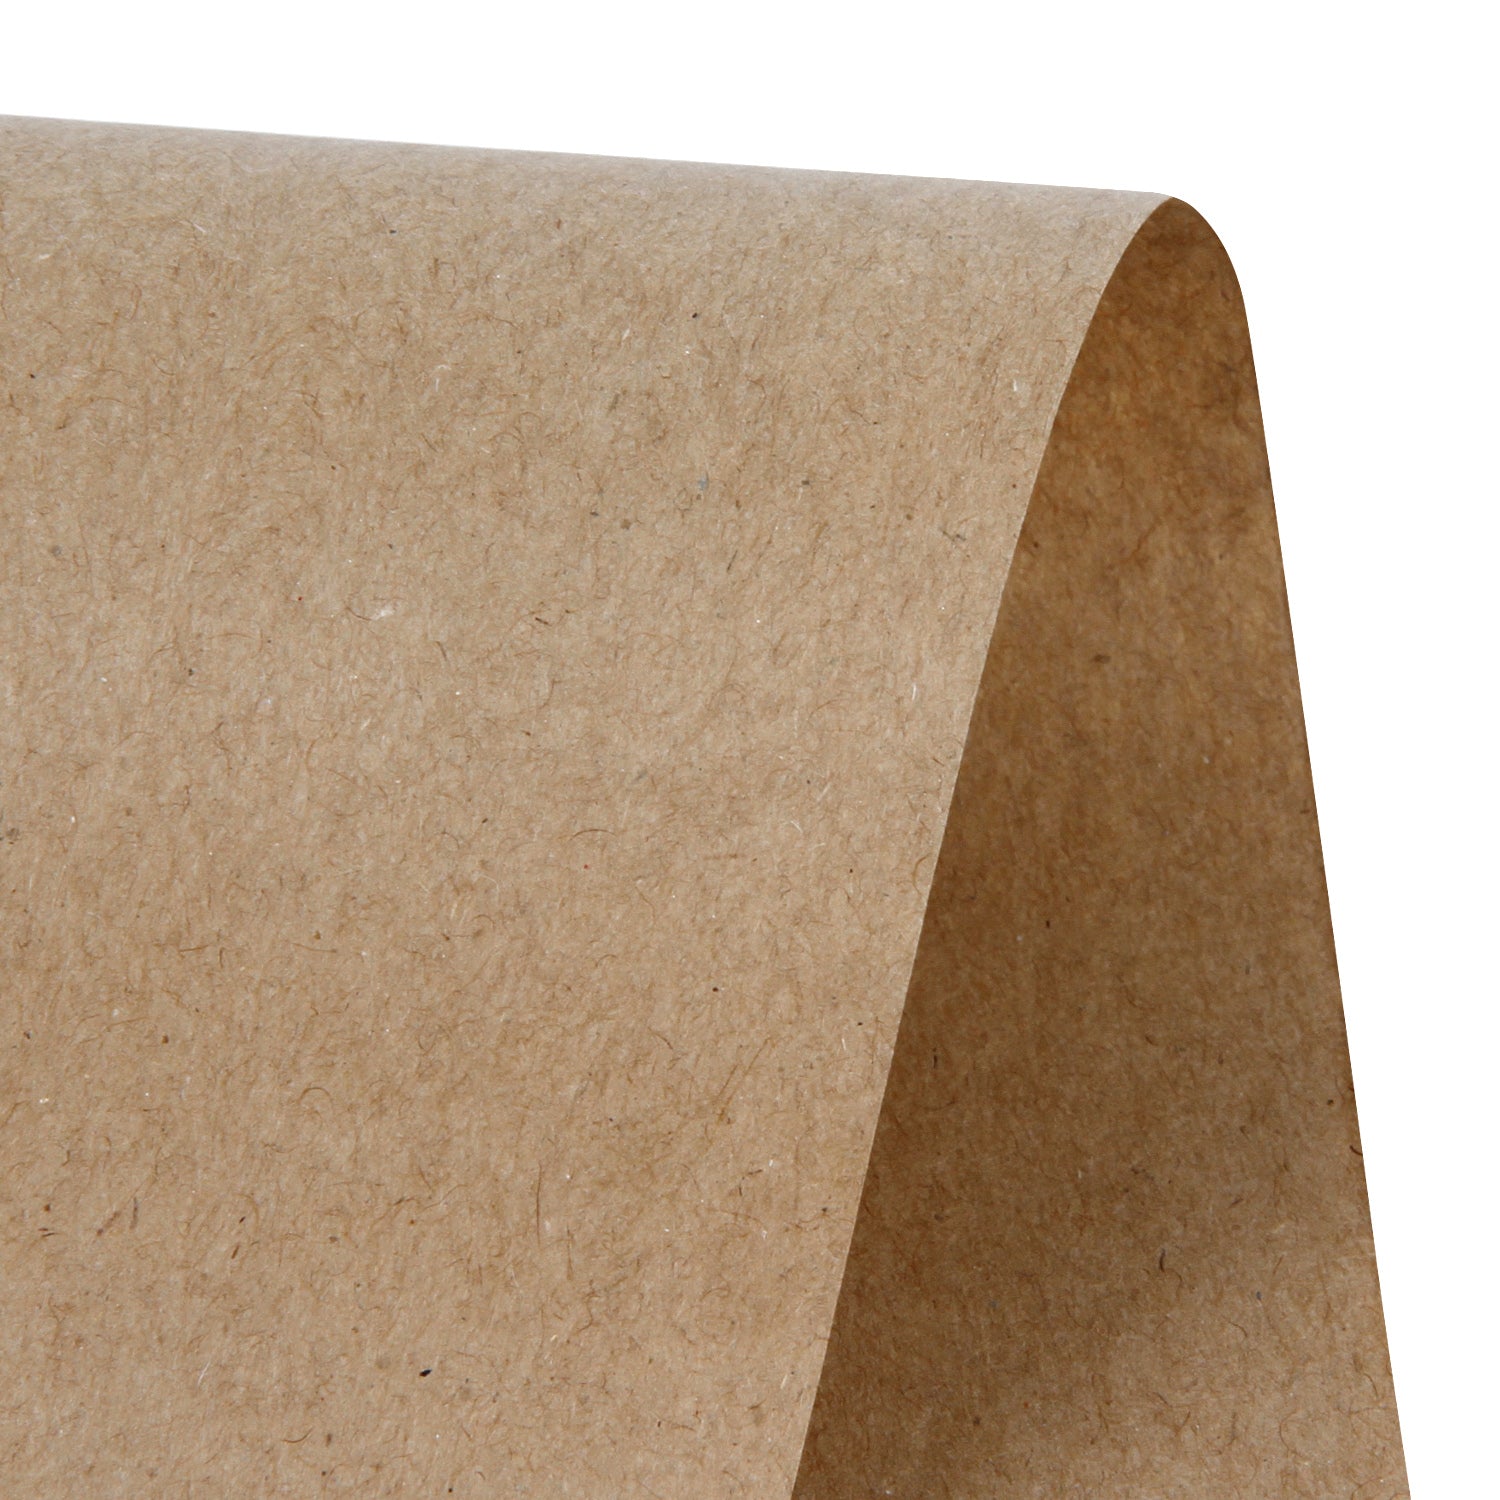  Pacon 5824 Kraft Paper Roll, 50 lbs., 24 x 1000 ft,  Natural,Brown : Art Paper Rolls : Arts, Crafts & Sewing